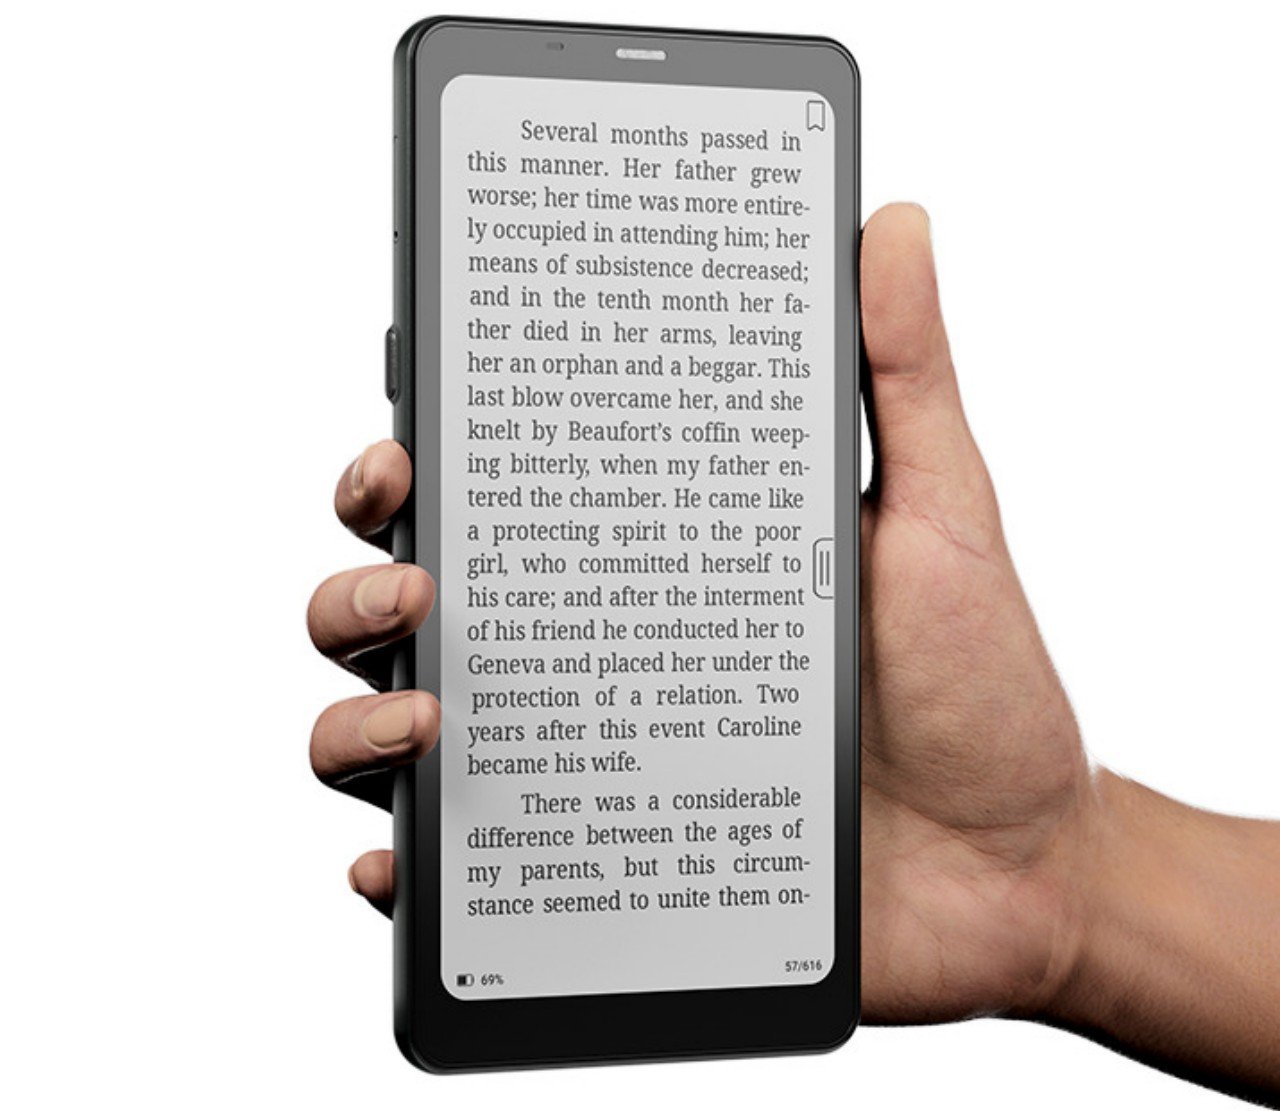 Onyx BOOX Palma review - Looks like a phone but it's a mini ereader that  fits in your pocket - The Gadgeteer